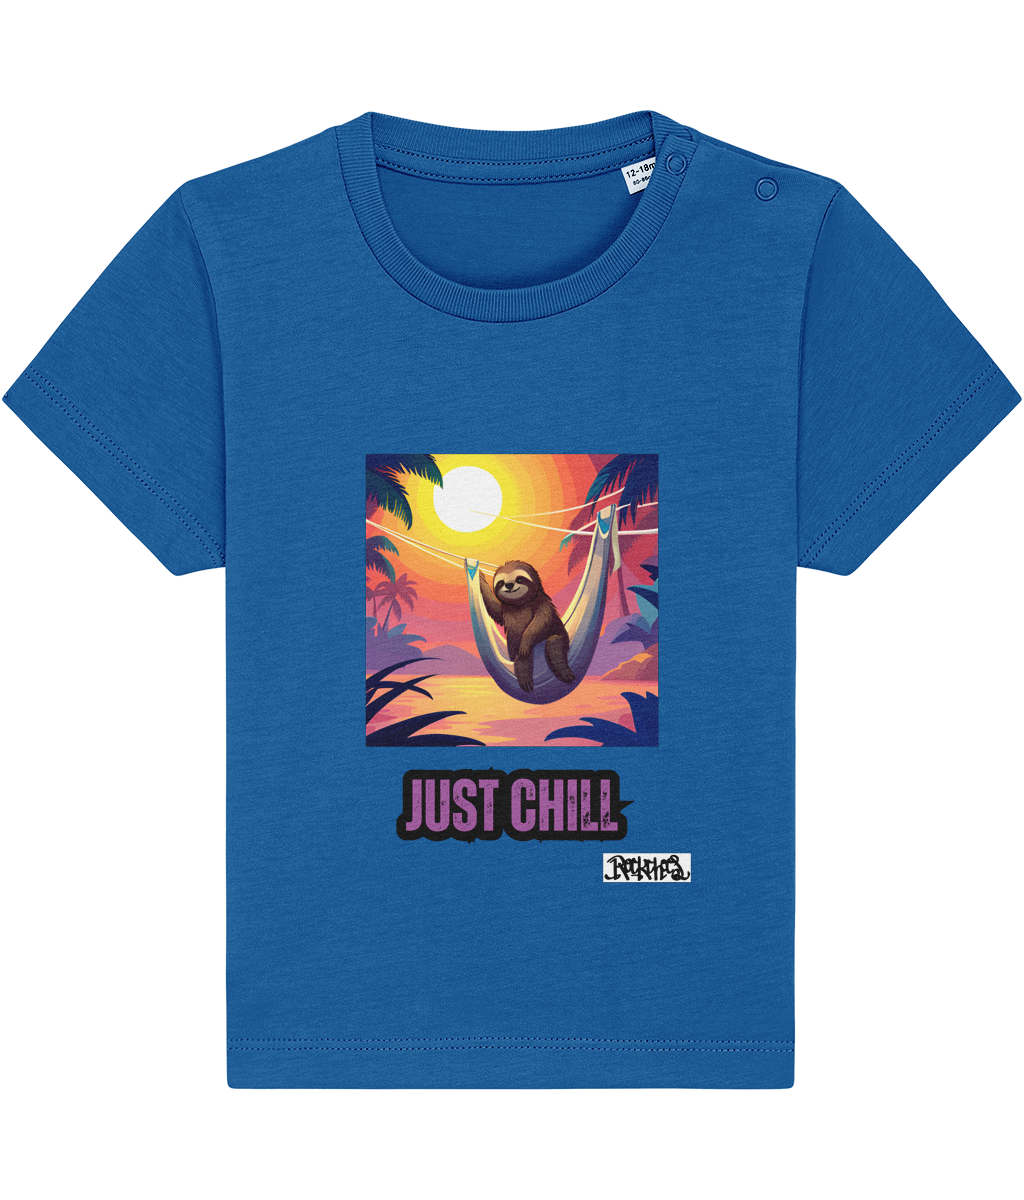 Just Chill Sloth T Shirt Designed by Rock Chocs